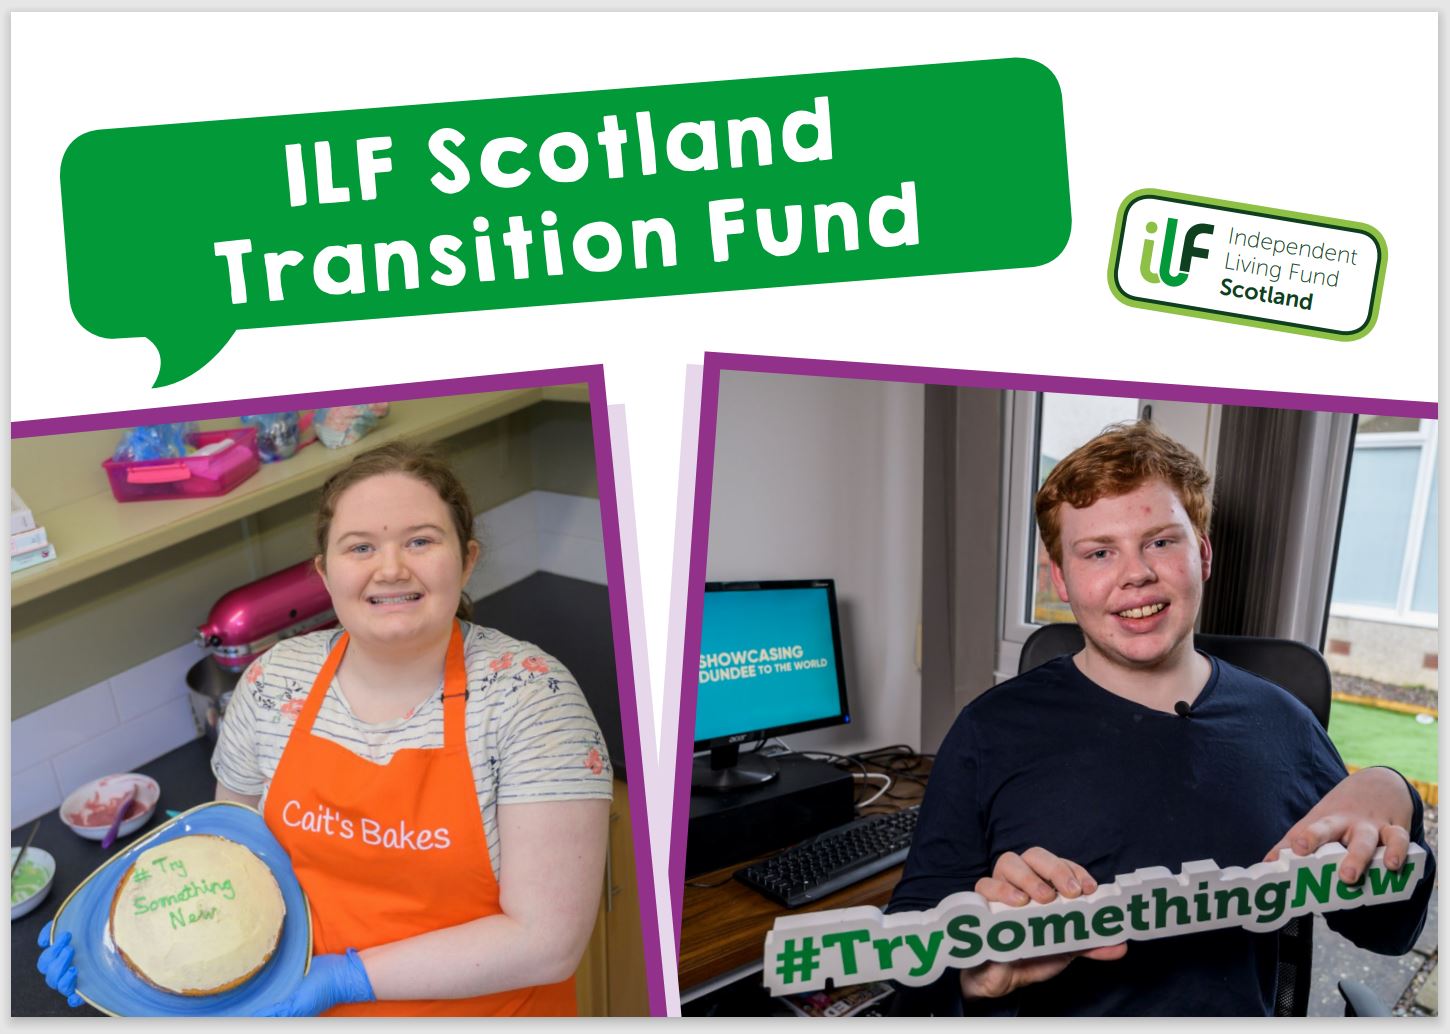 Cover image showing the text "ILF Scotland Transition Fund", the ILF Scotland logo and a picture of two recipients, a woman holding a cake and a young man holding the banner #TrySomethingNew